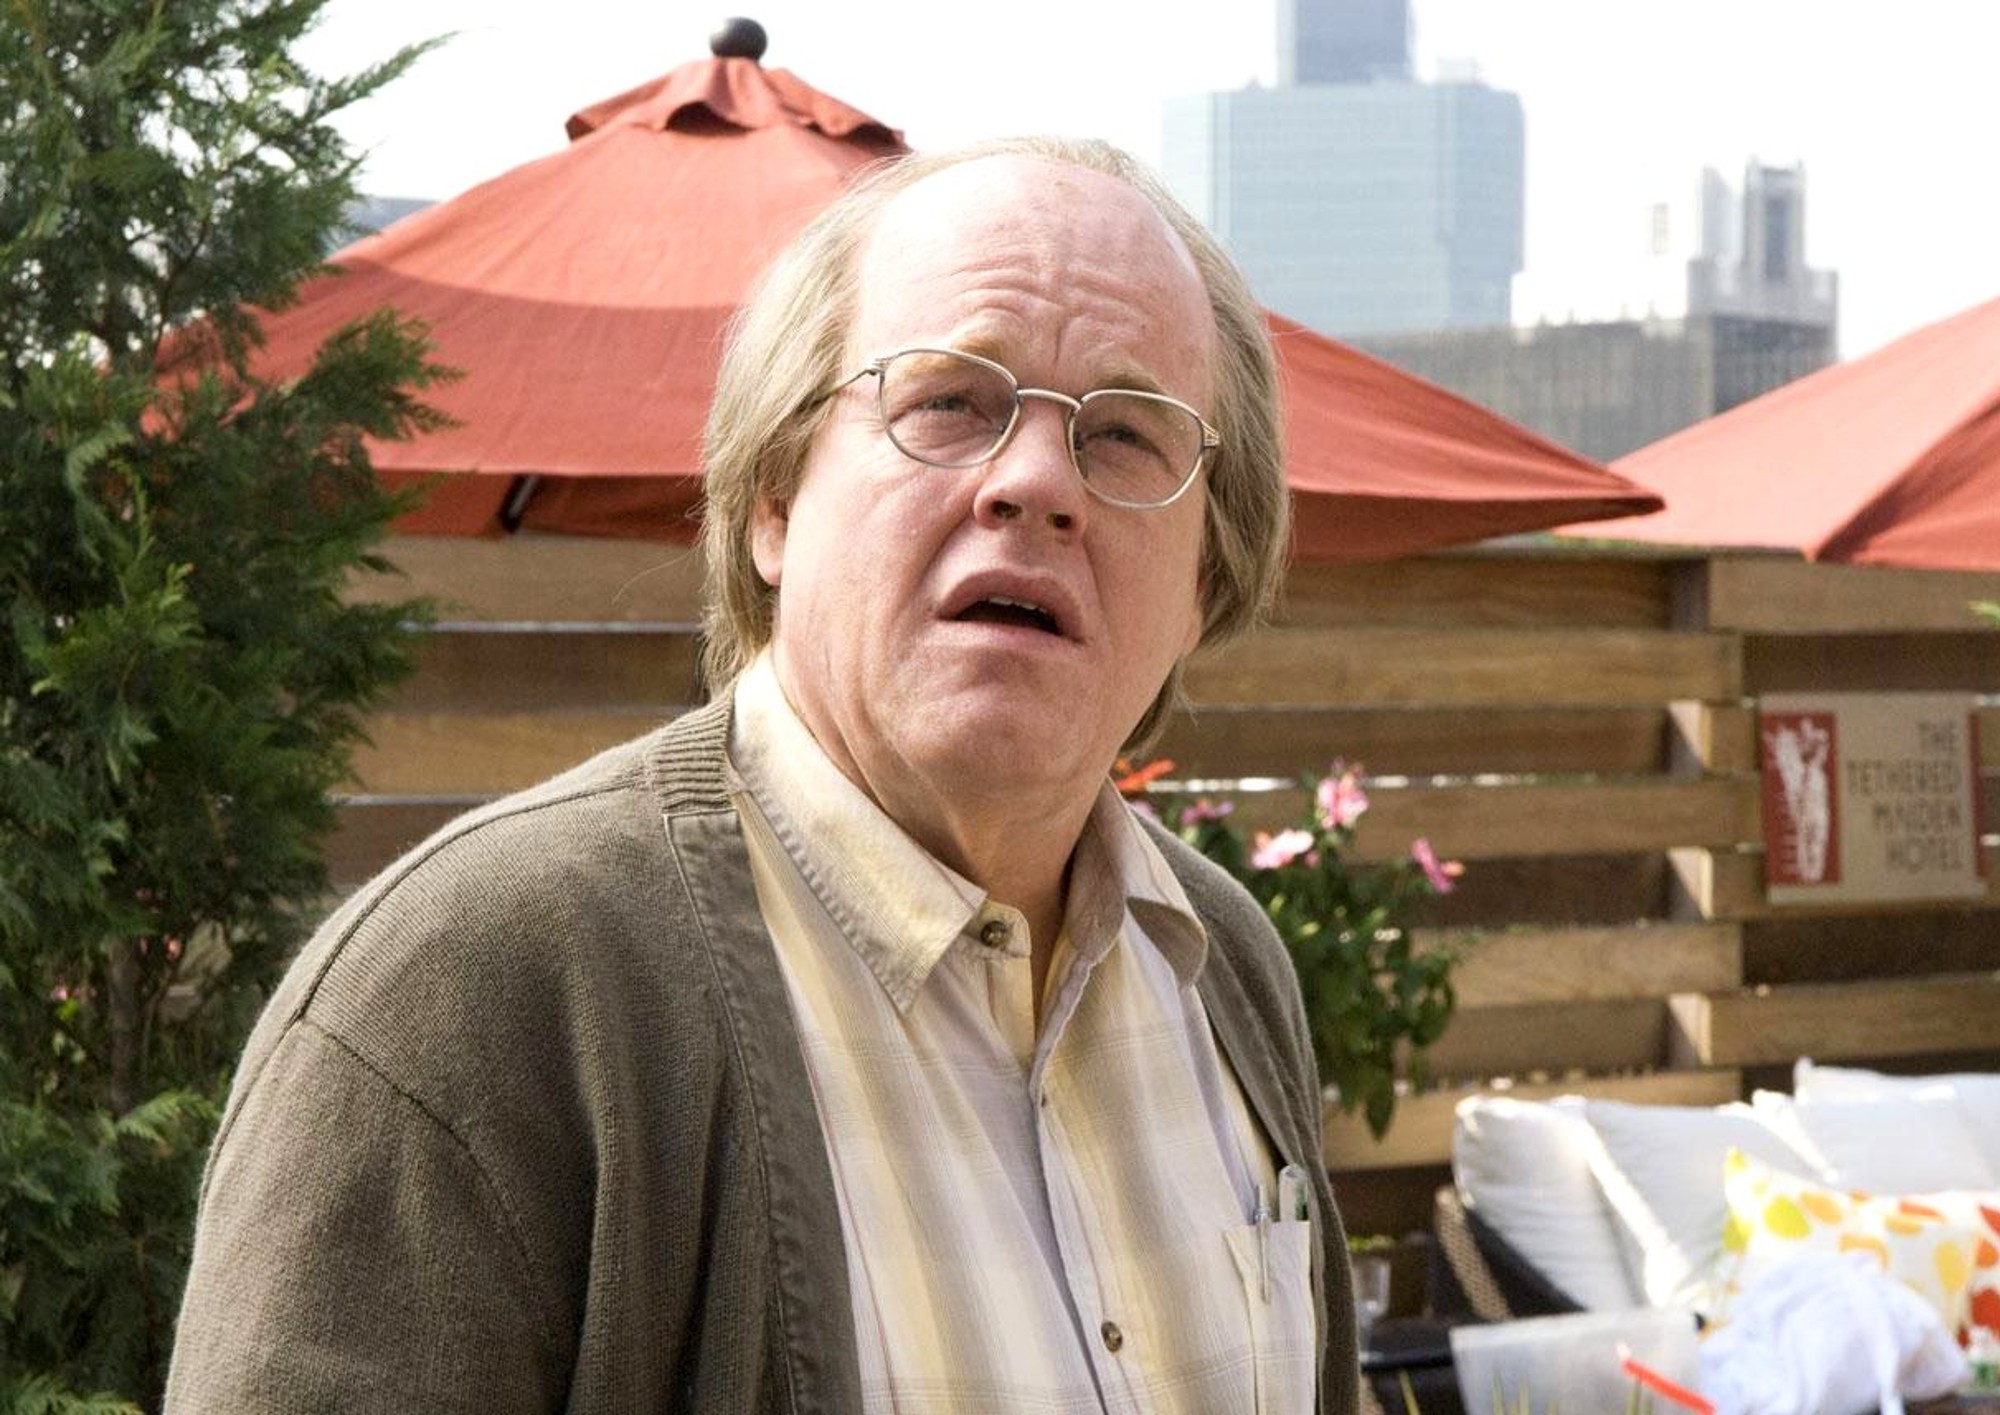 Image from the motion picture Synecdoche, New York